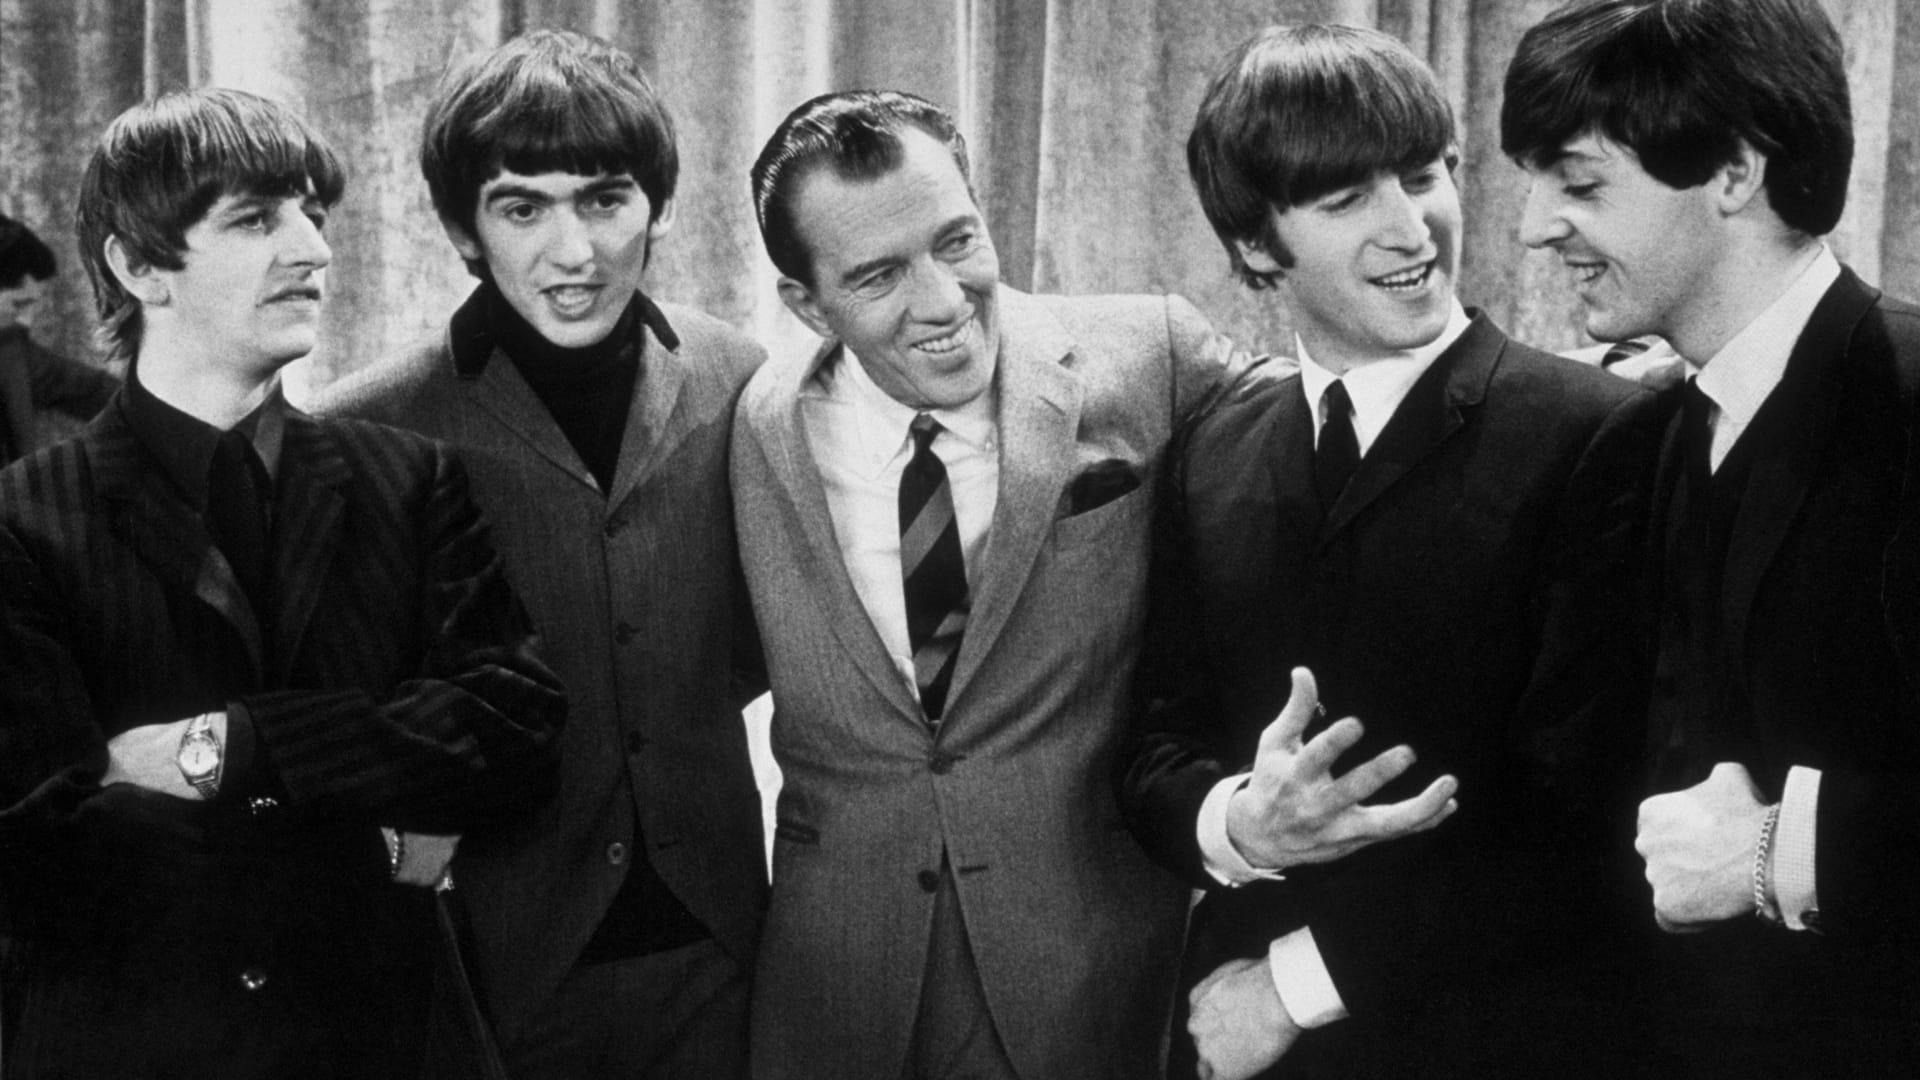 The 4 Complete Ed Sullivan Shows Starring The Beatles backdrop